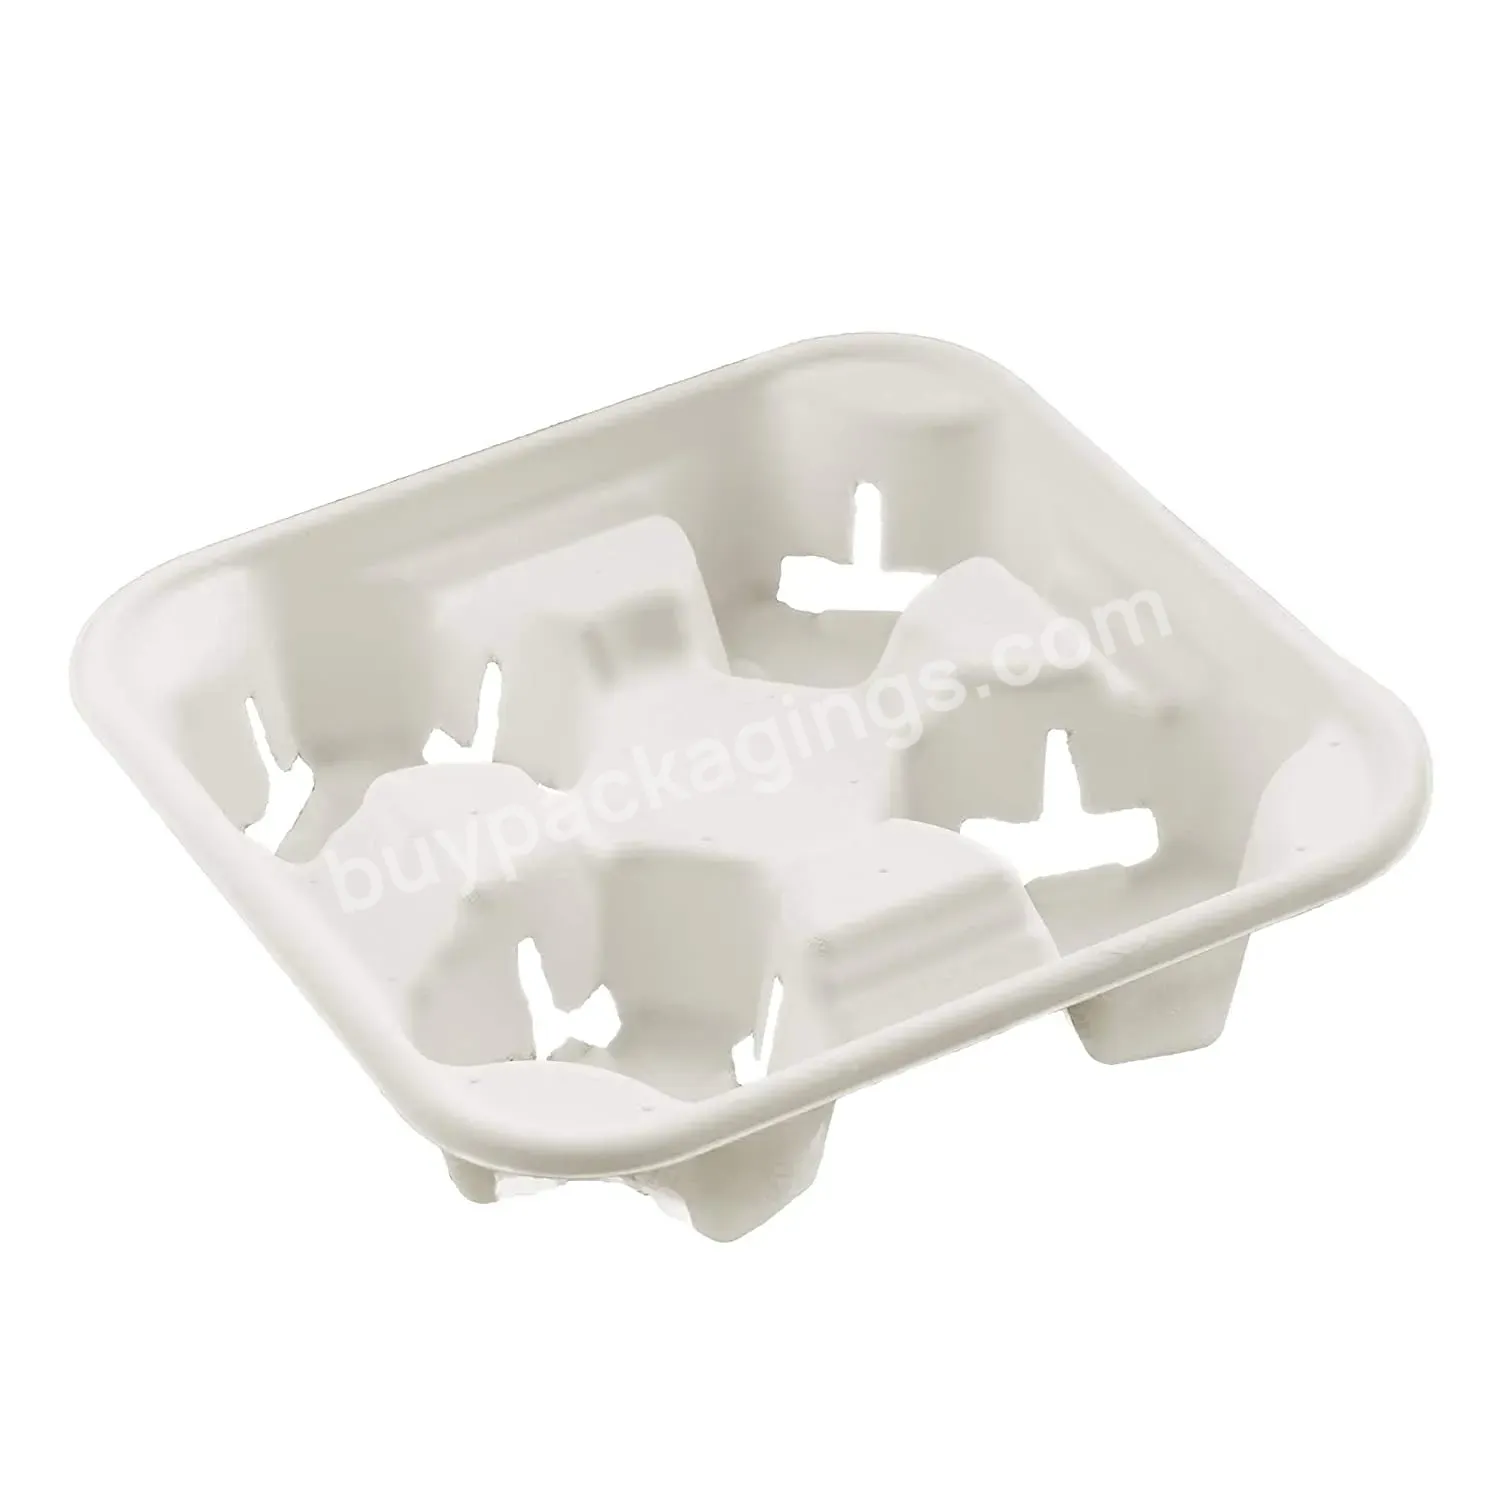 Disposable Drink Carriers White Biodegradable Paper Pulp Cup Carrier Comes With 10 Paper Straws Free Sample - Buy Paper Pulp Drink Carrier,Free Sample Cup Holder,Coffee Cup Holder Tray.